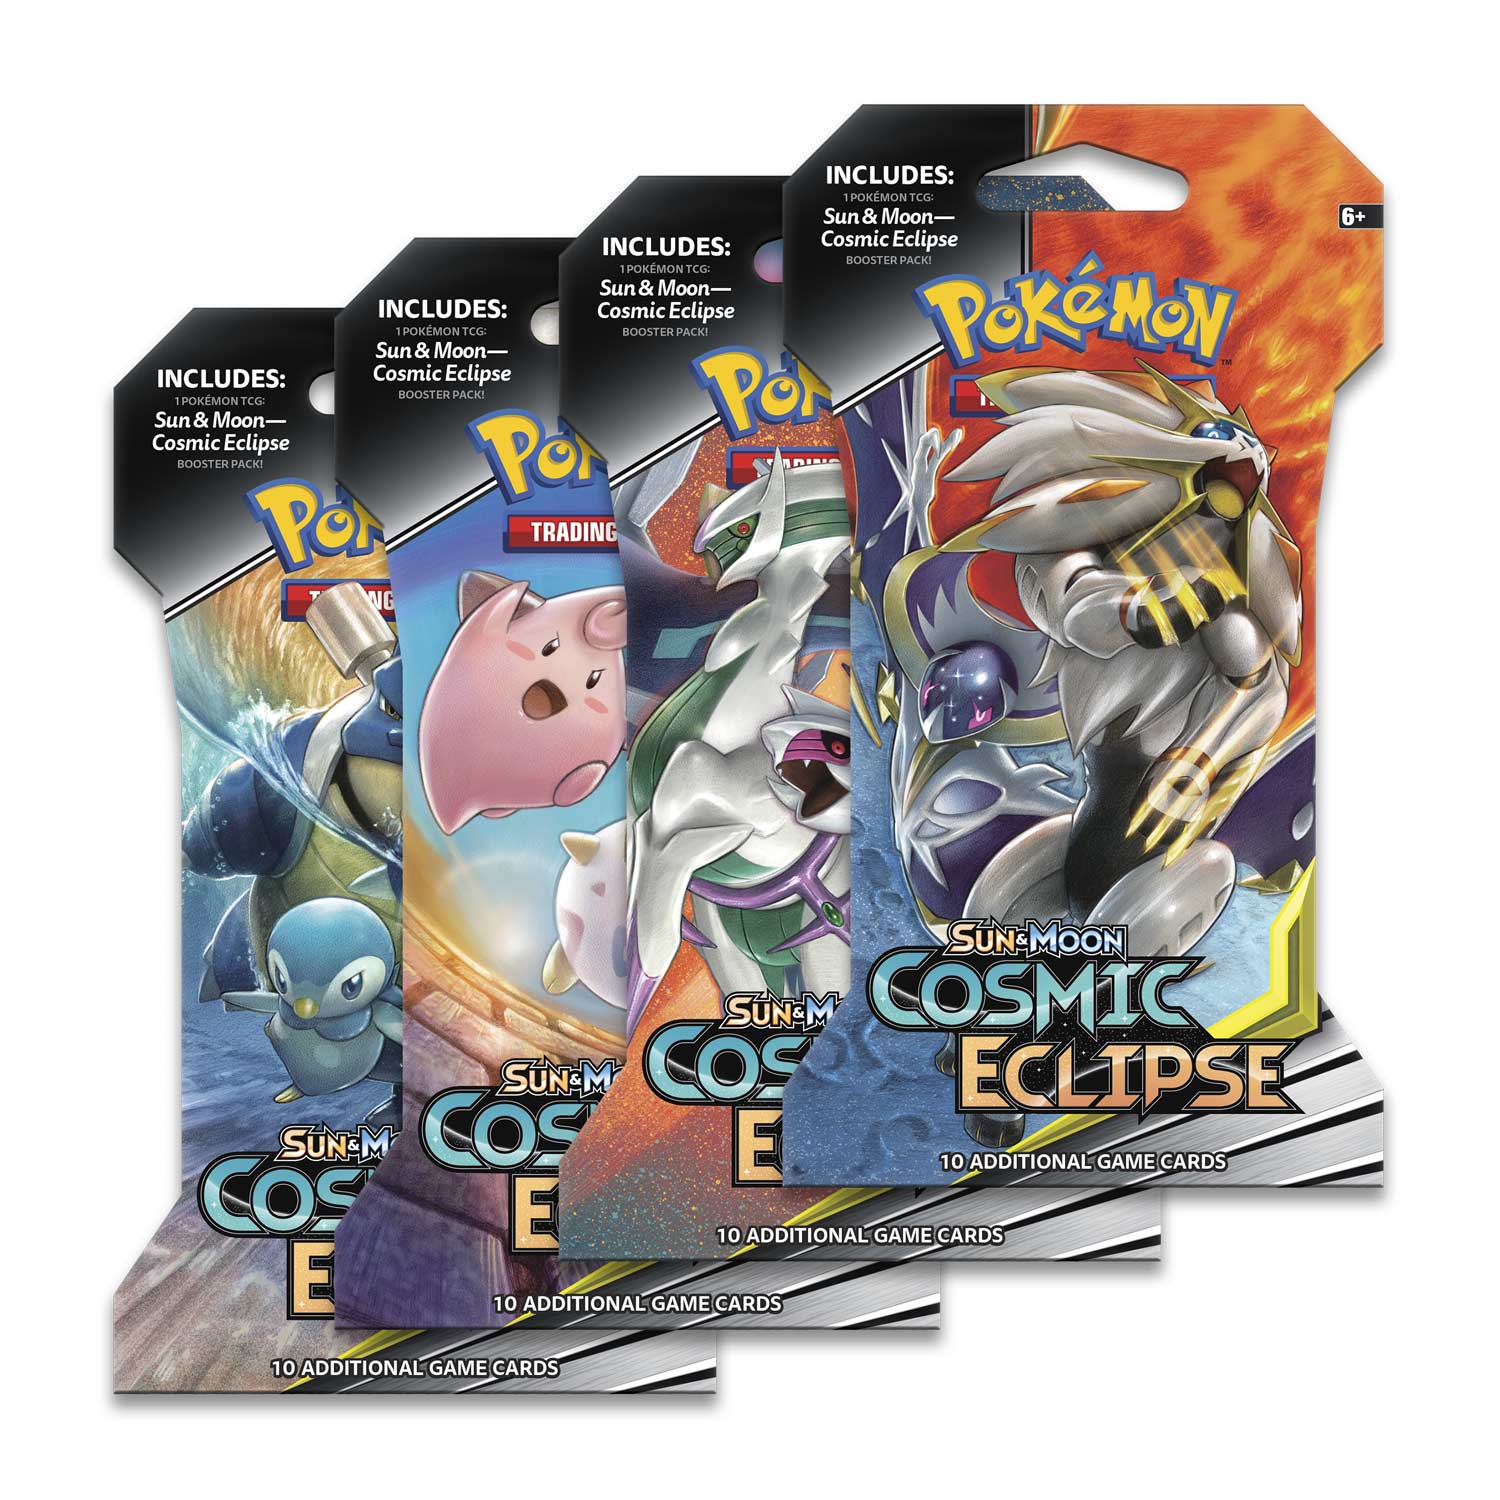 Pokémon Trading Card Game Sun & Moon Cosmic Eclipse Booster Pack for sale online 